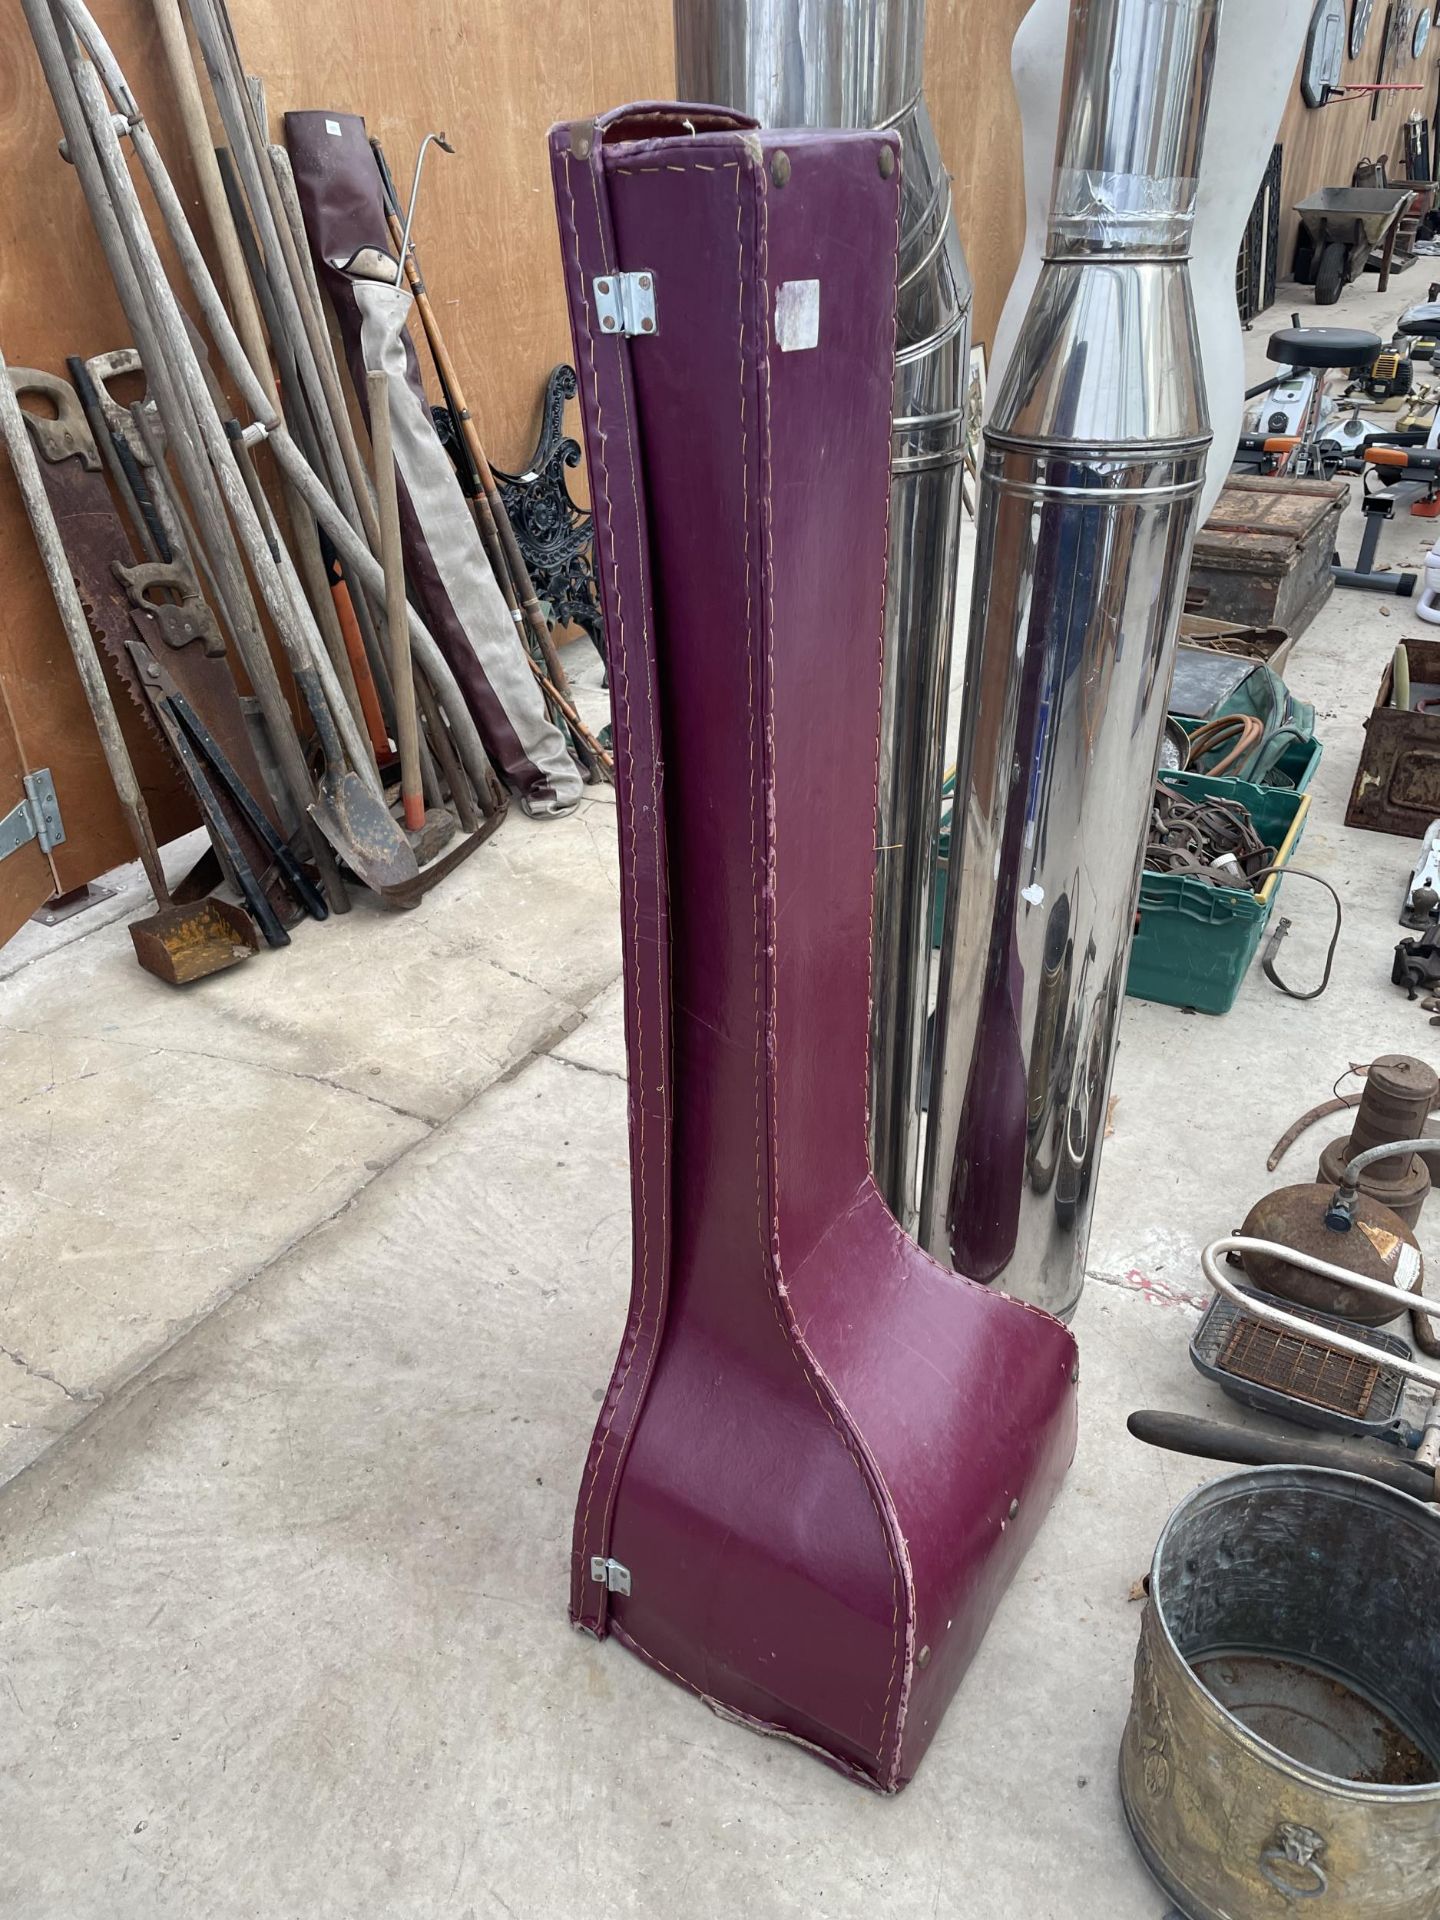 A LARGE PURPLE INSTRUMENT CASE - Image 2 of 4